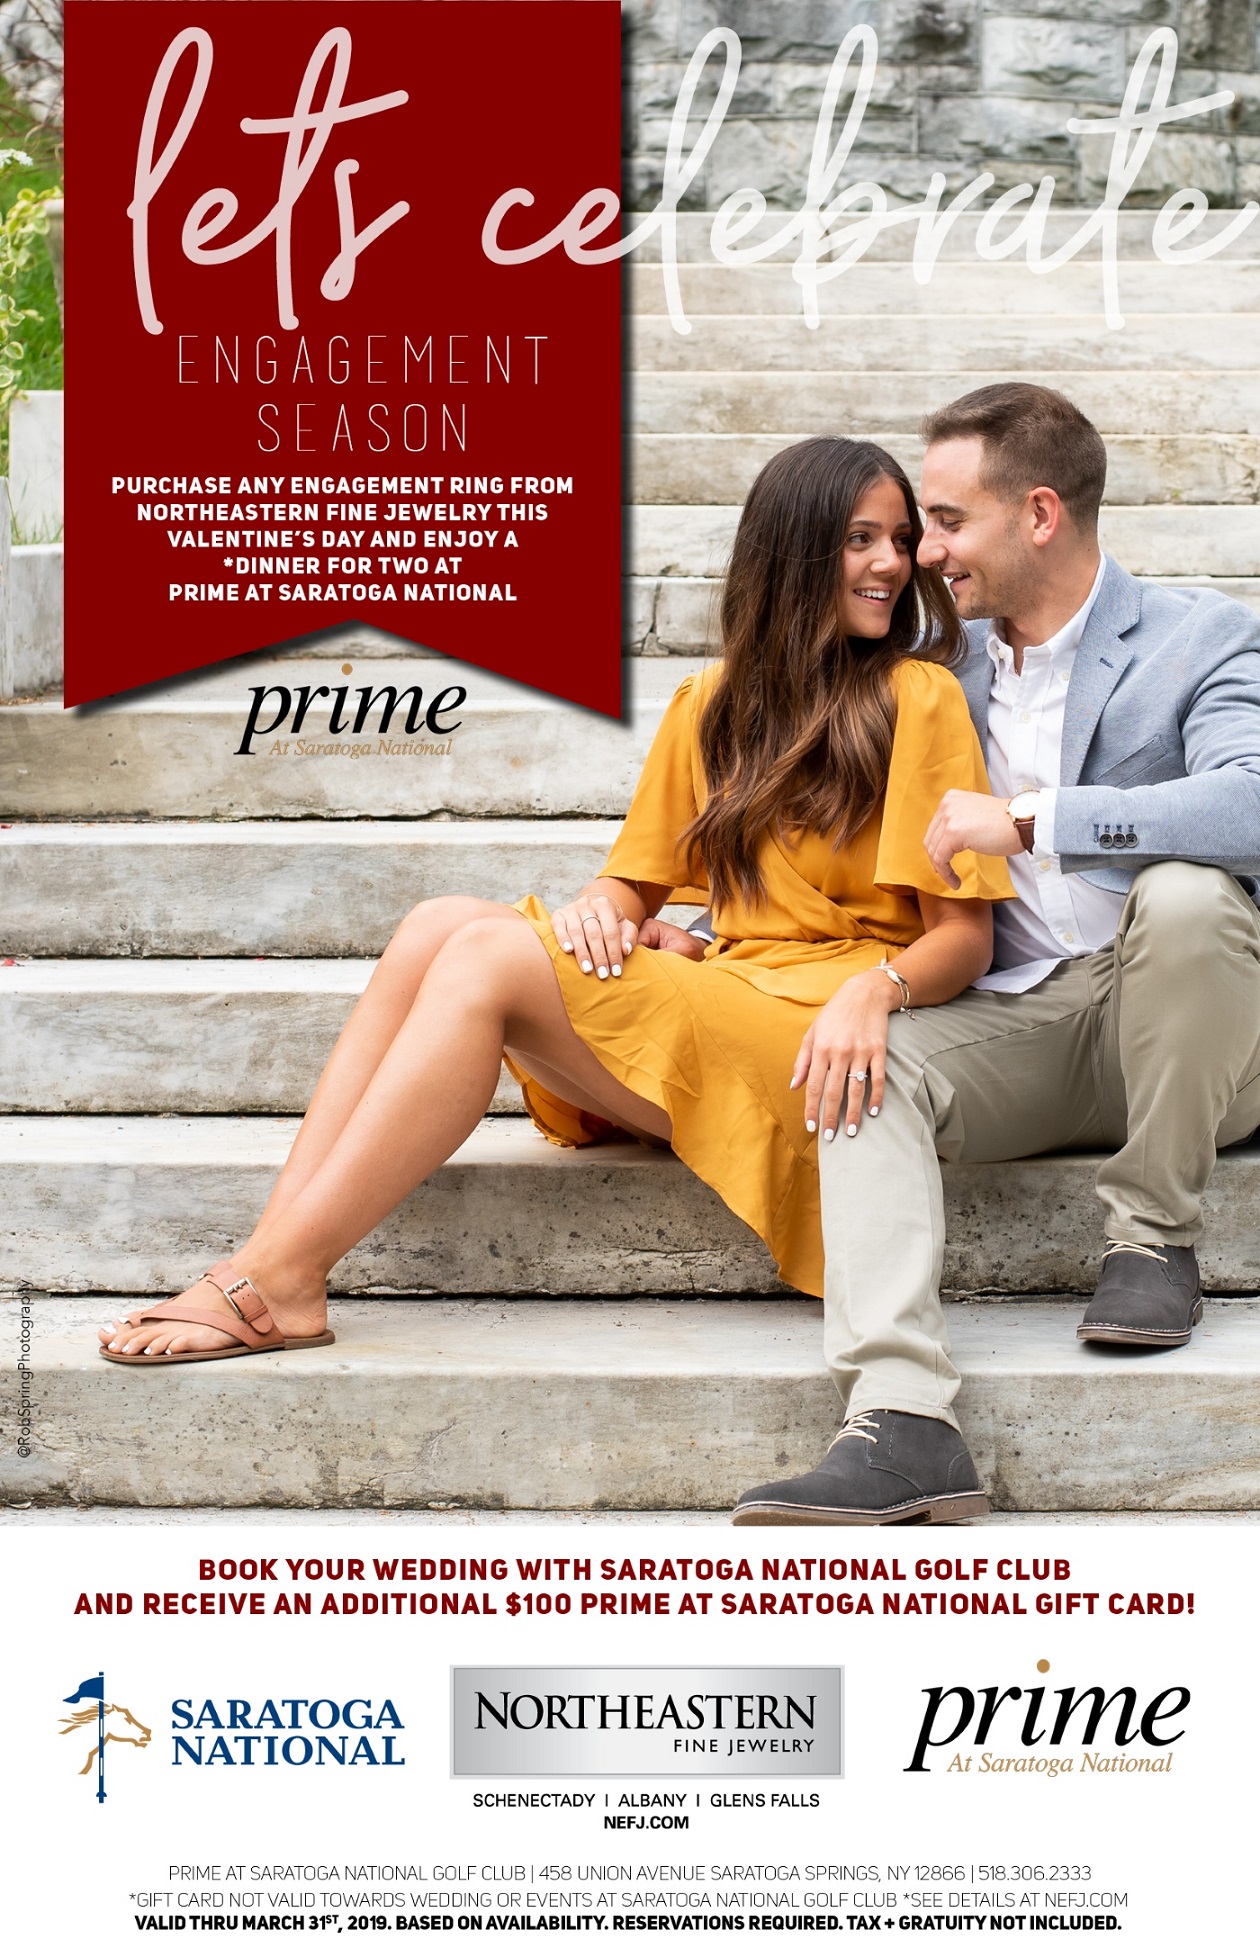 Buy your engagement ring from NEFJ and enjoy dinner for two at Prime at Saratoga National.